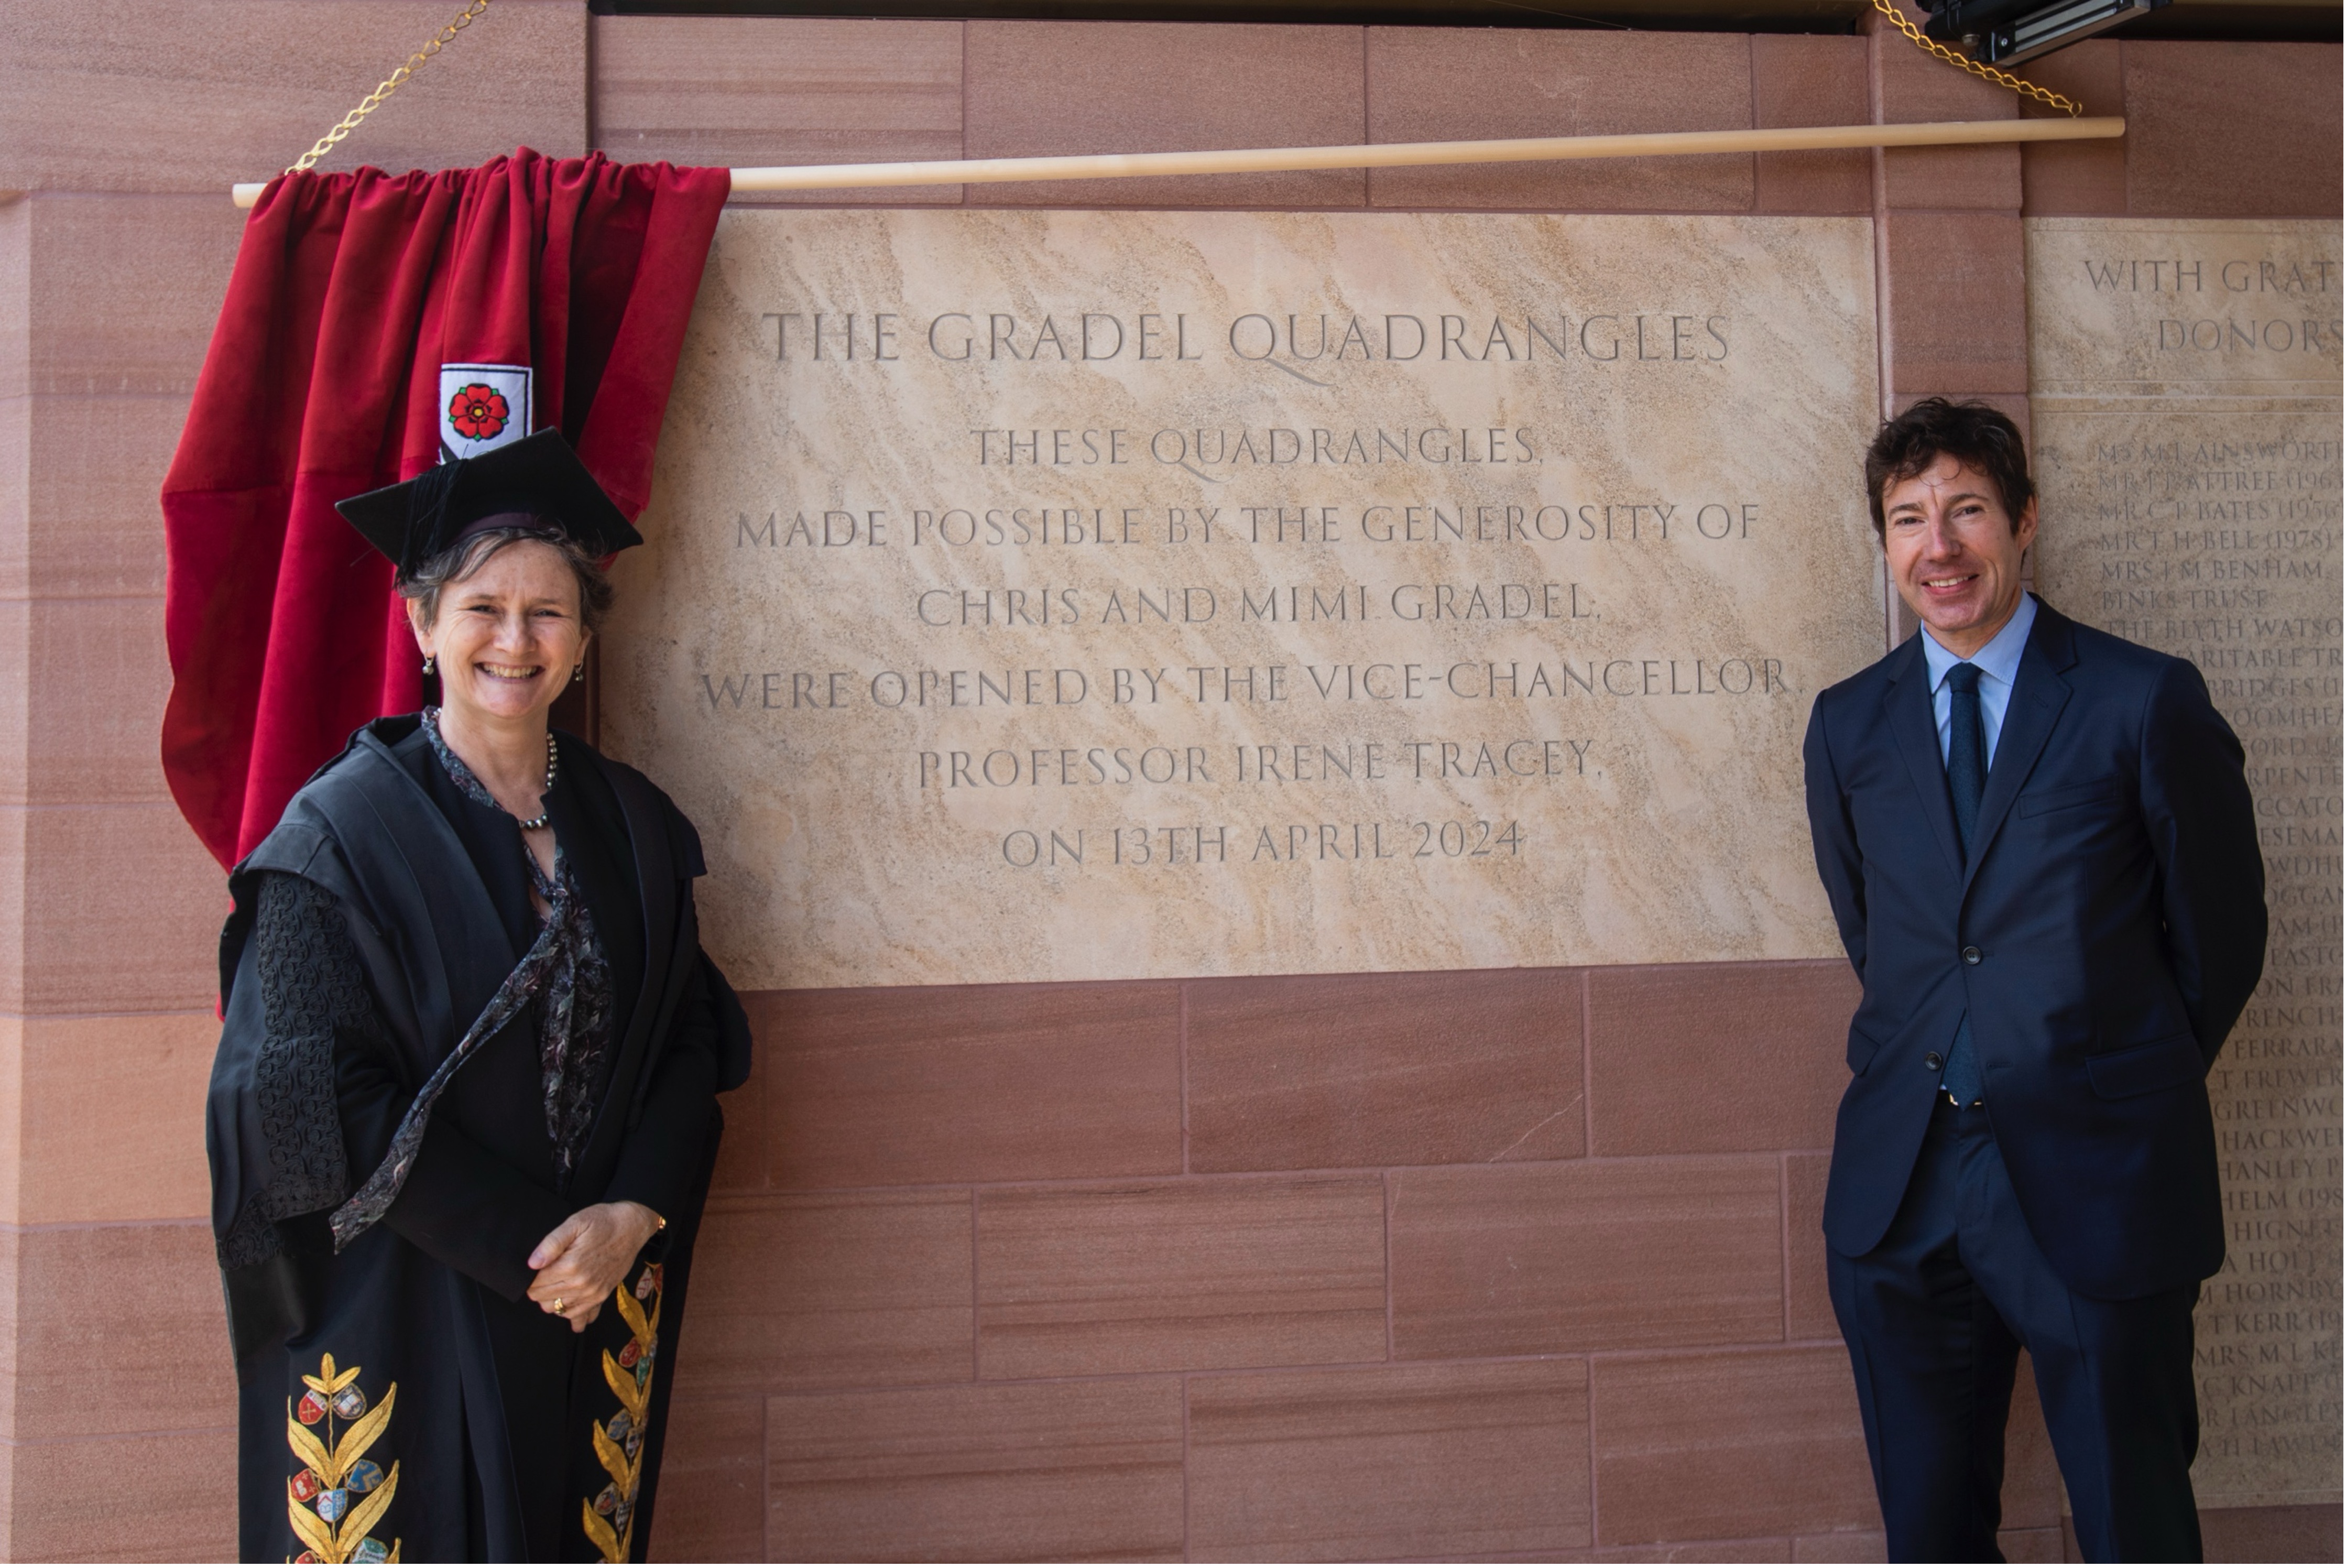 The VC stands with Chris Gradel next to the ceremonial stone marking the opening of the Gradel Quadrangles